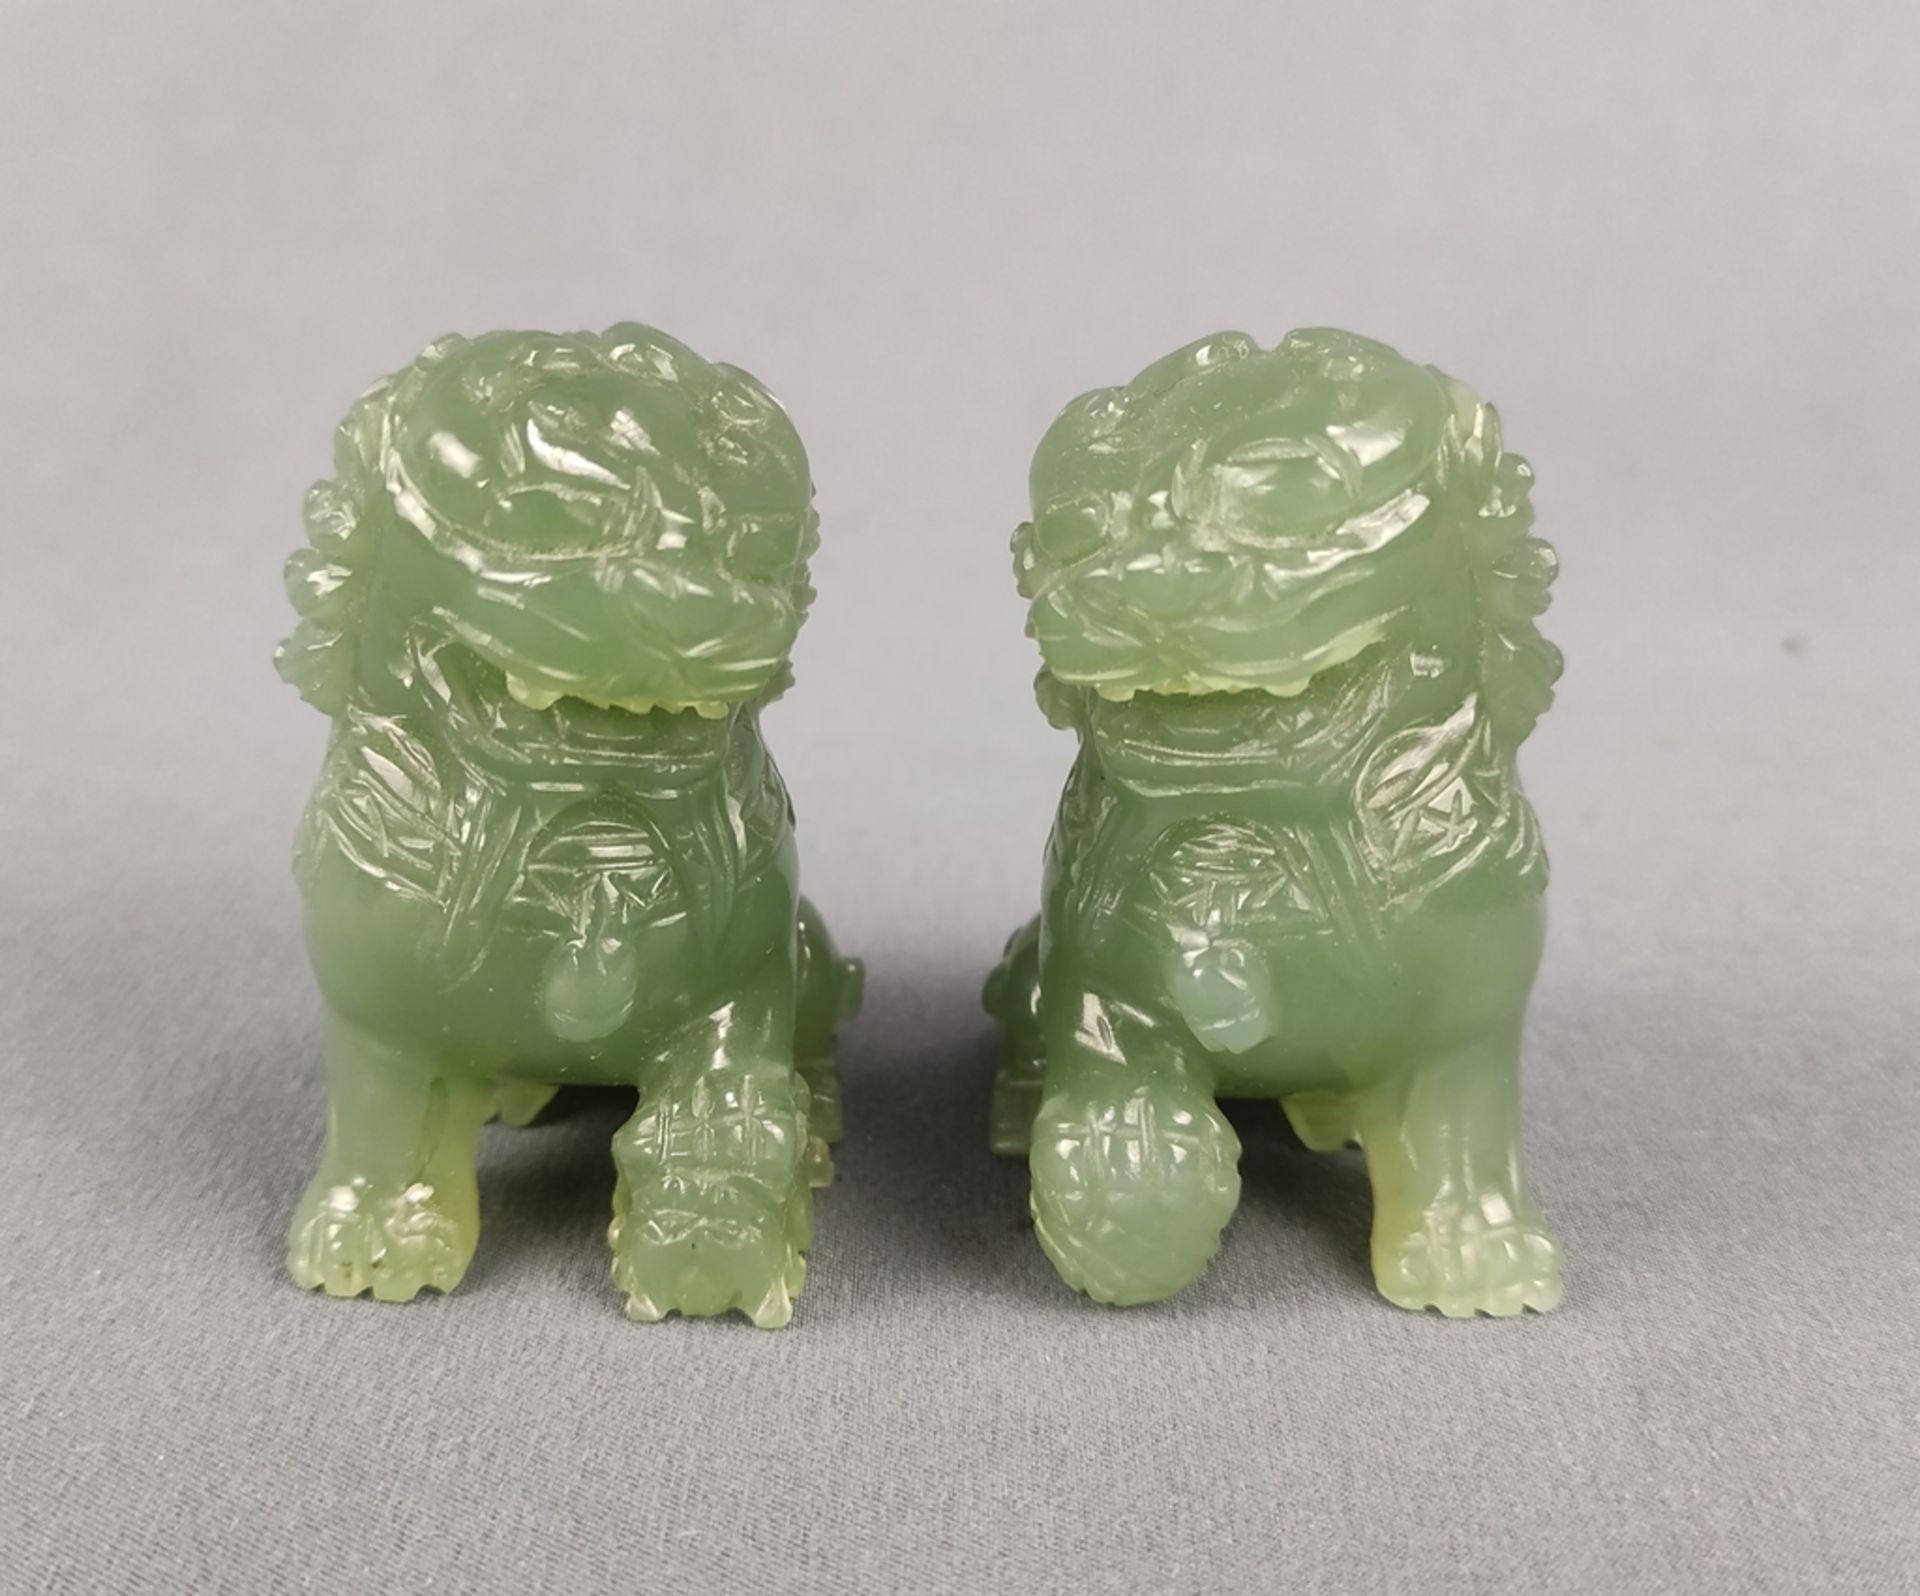 Pair of guardian lions/ Fo dogs, jade carved, China, 20th century, height approx. 6cm each *832/03 